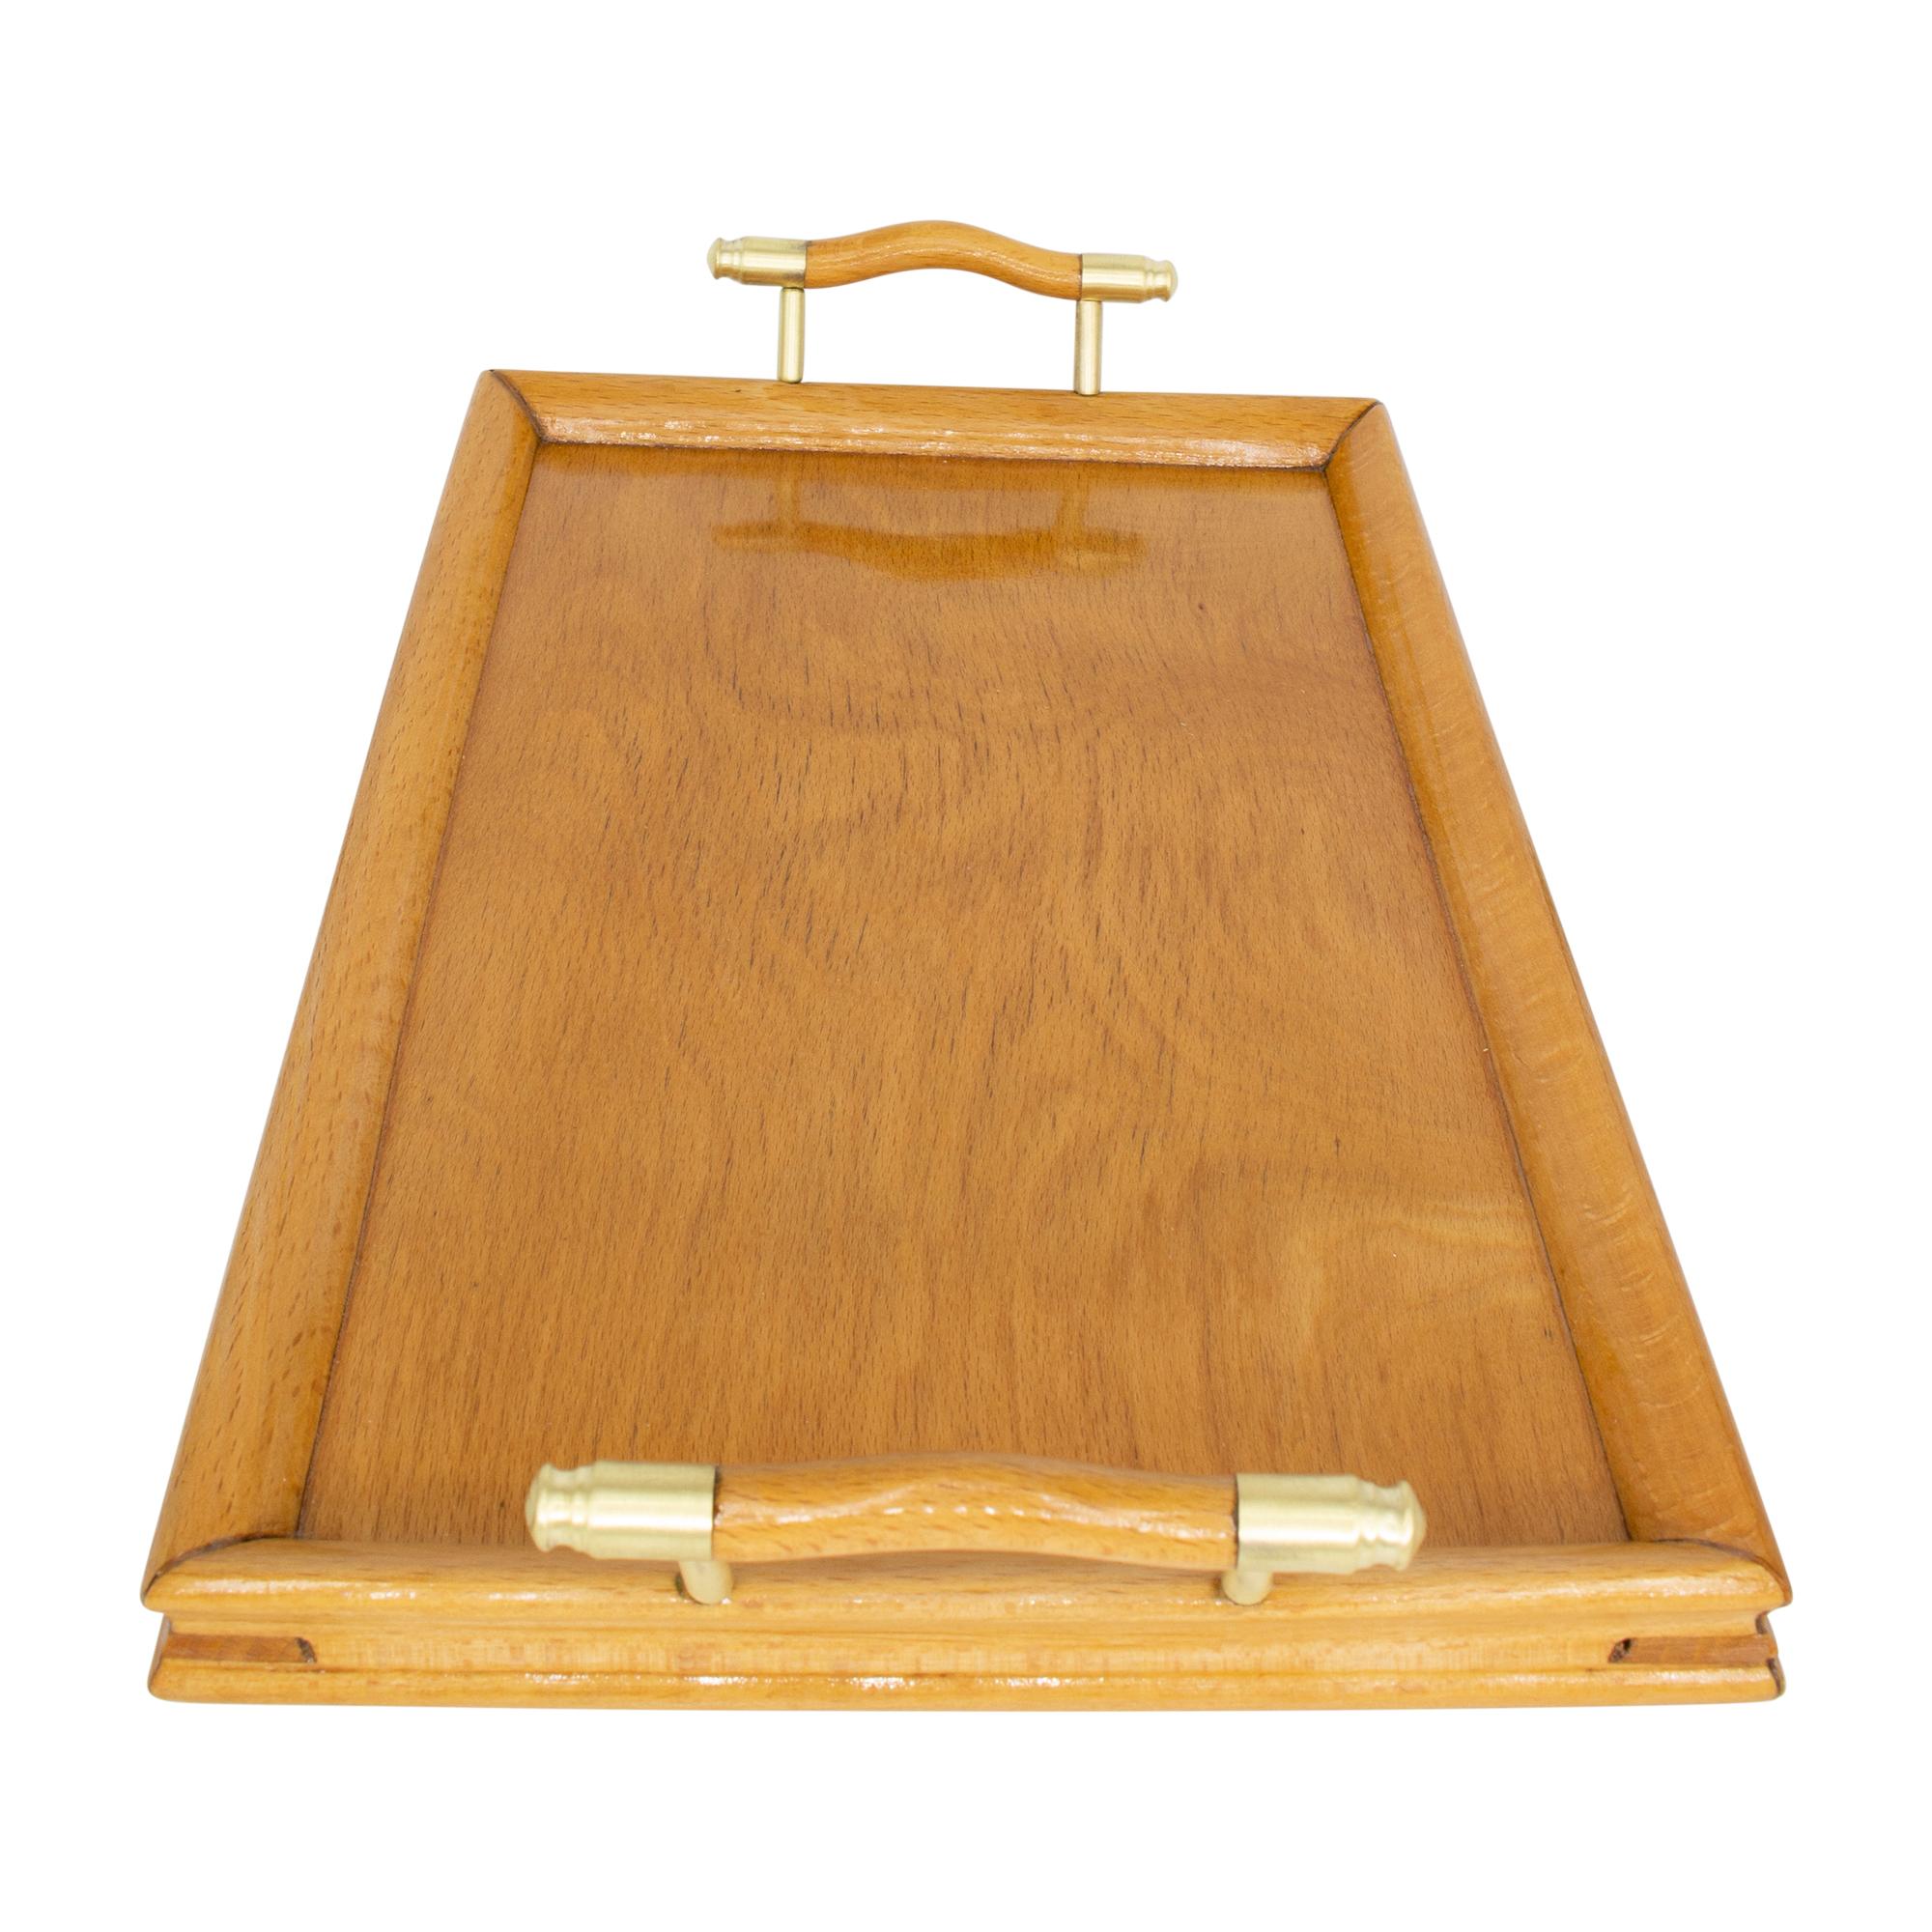 Beautiful small tray from the Art Nouveau period made of beech wood with brass and beech handles. Practical small and very decorative. Very good restored condition, newly hand polished.